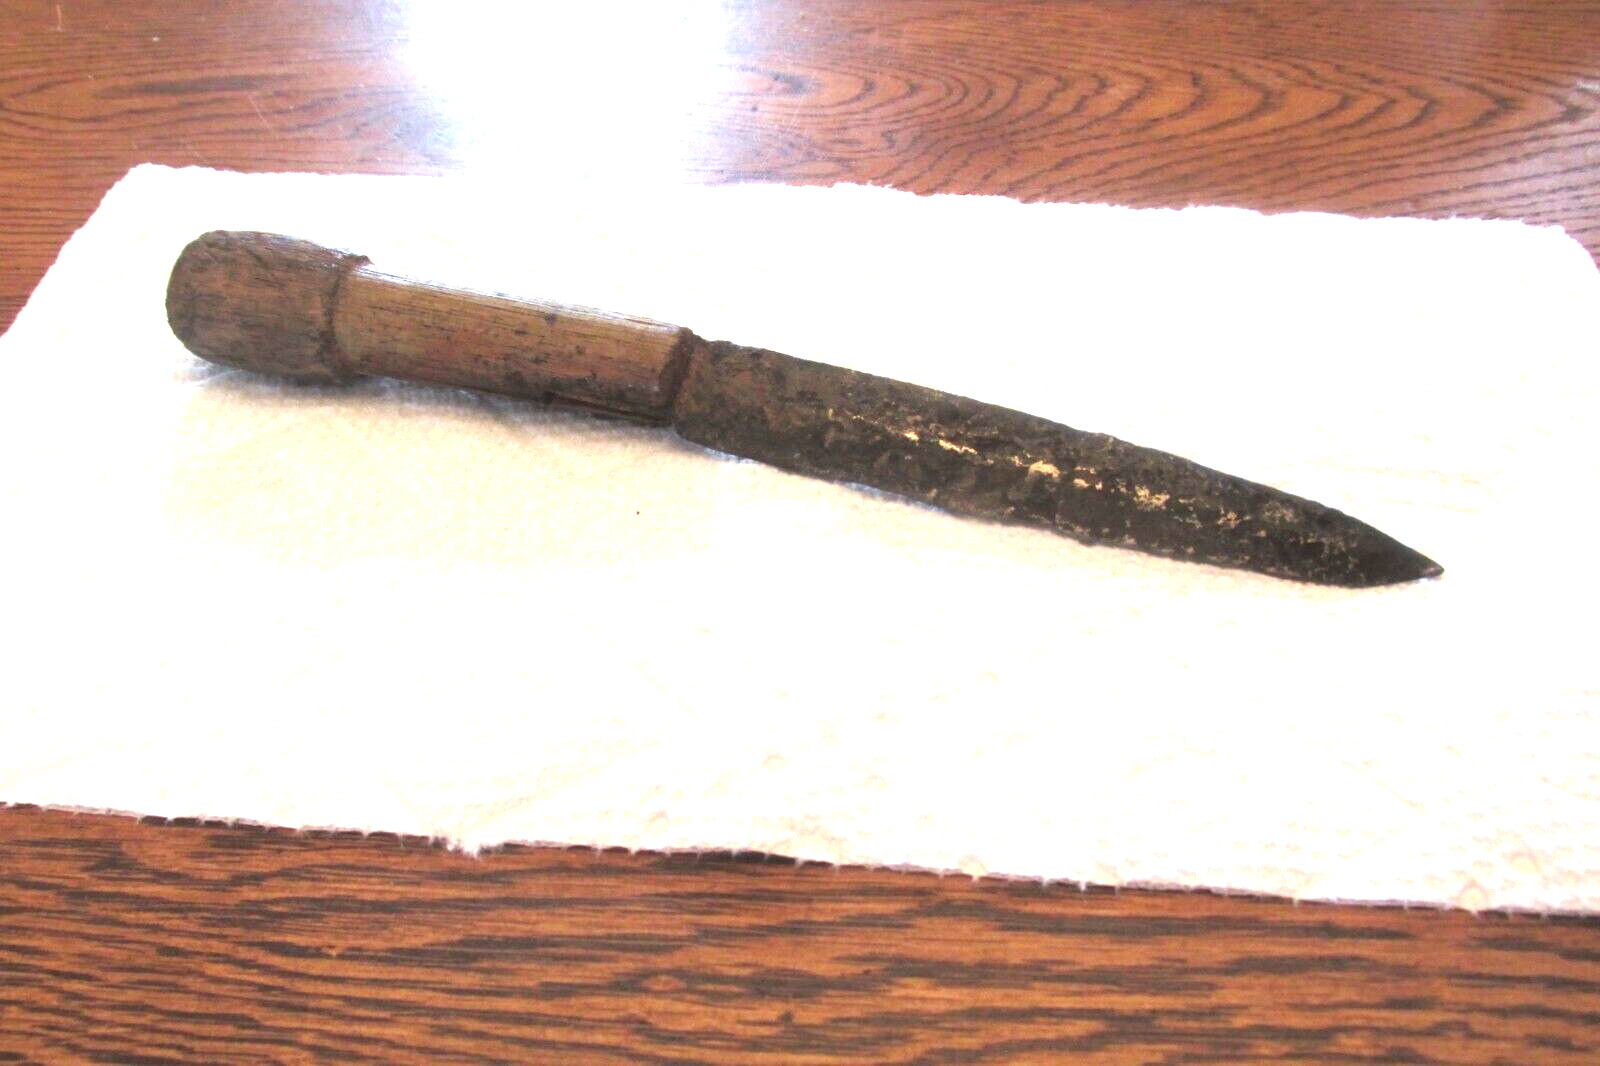 Original 18th C. Styled Knife, Blade is heavily Pitted. #2